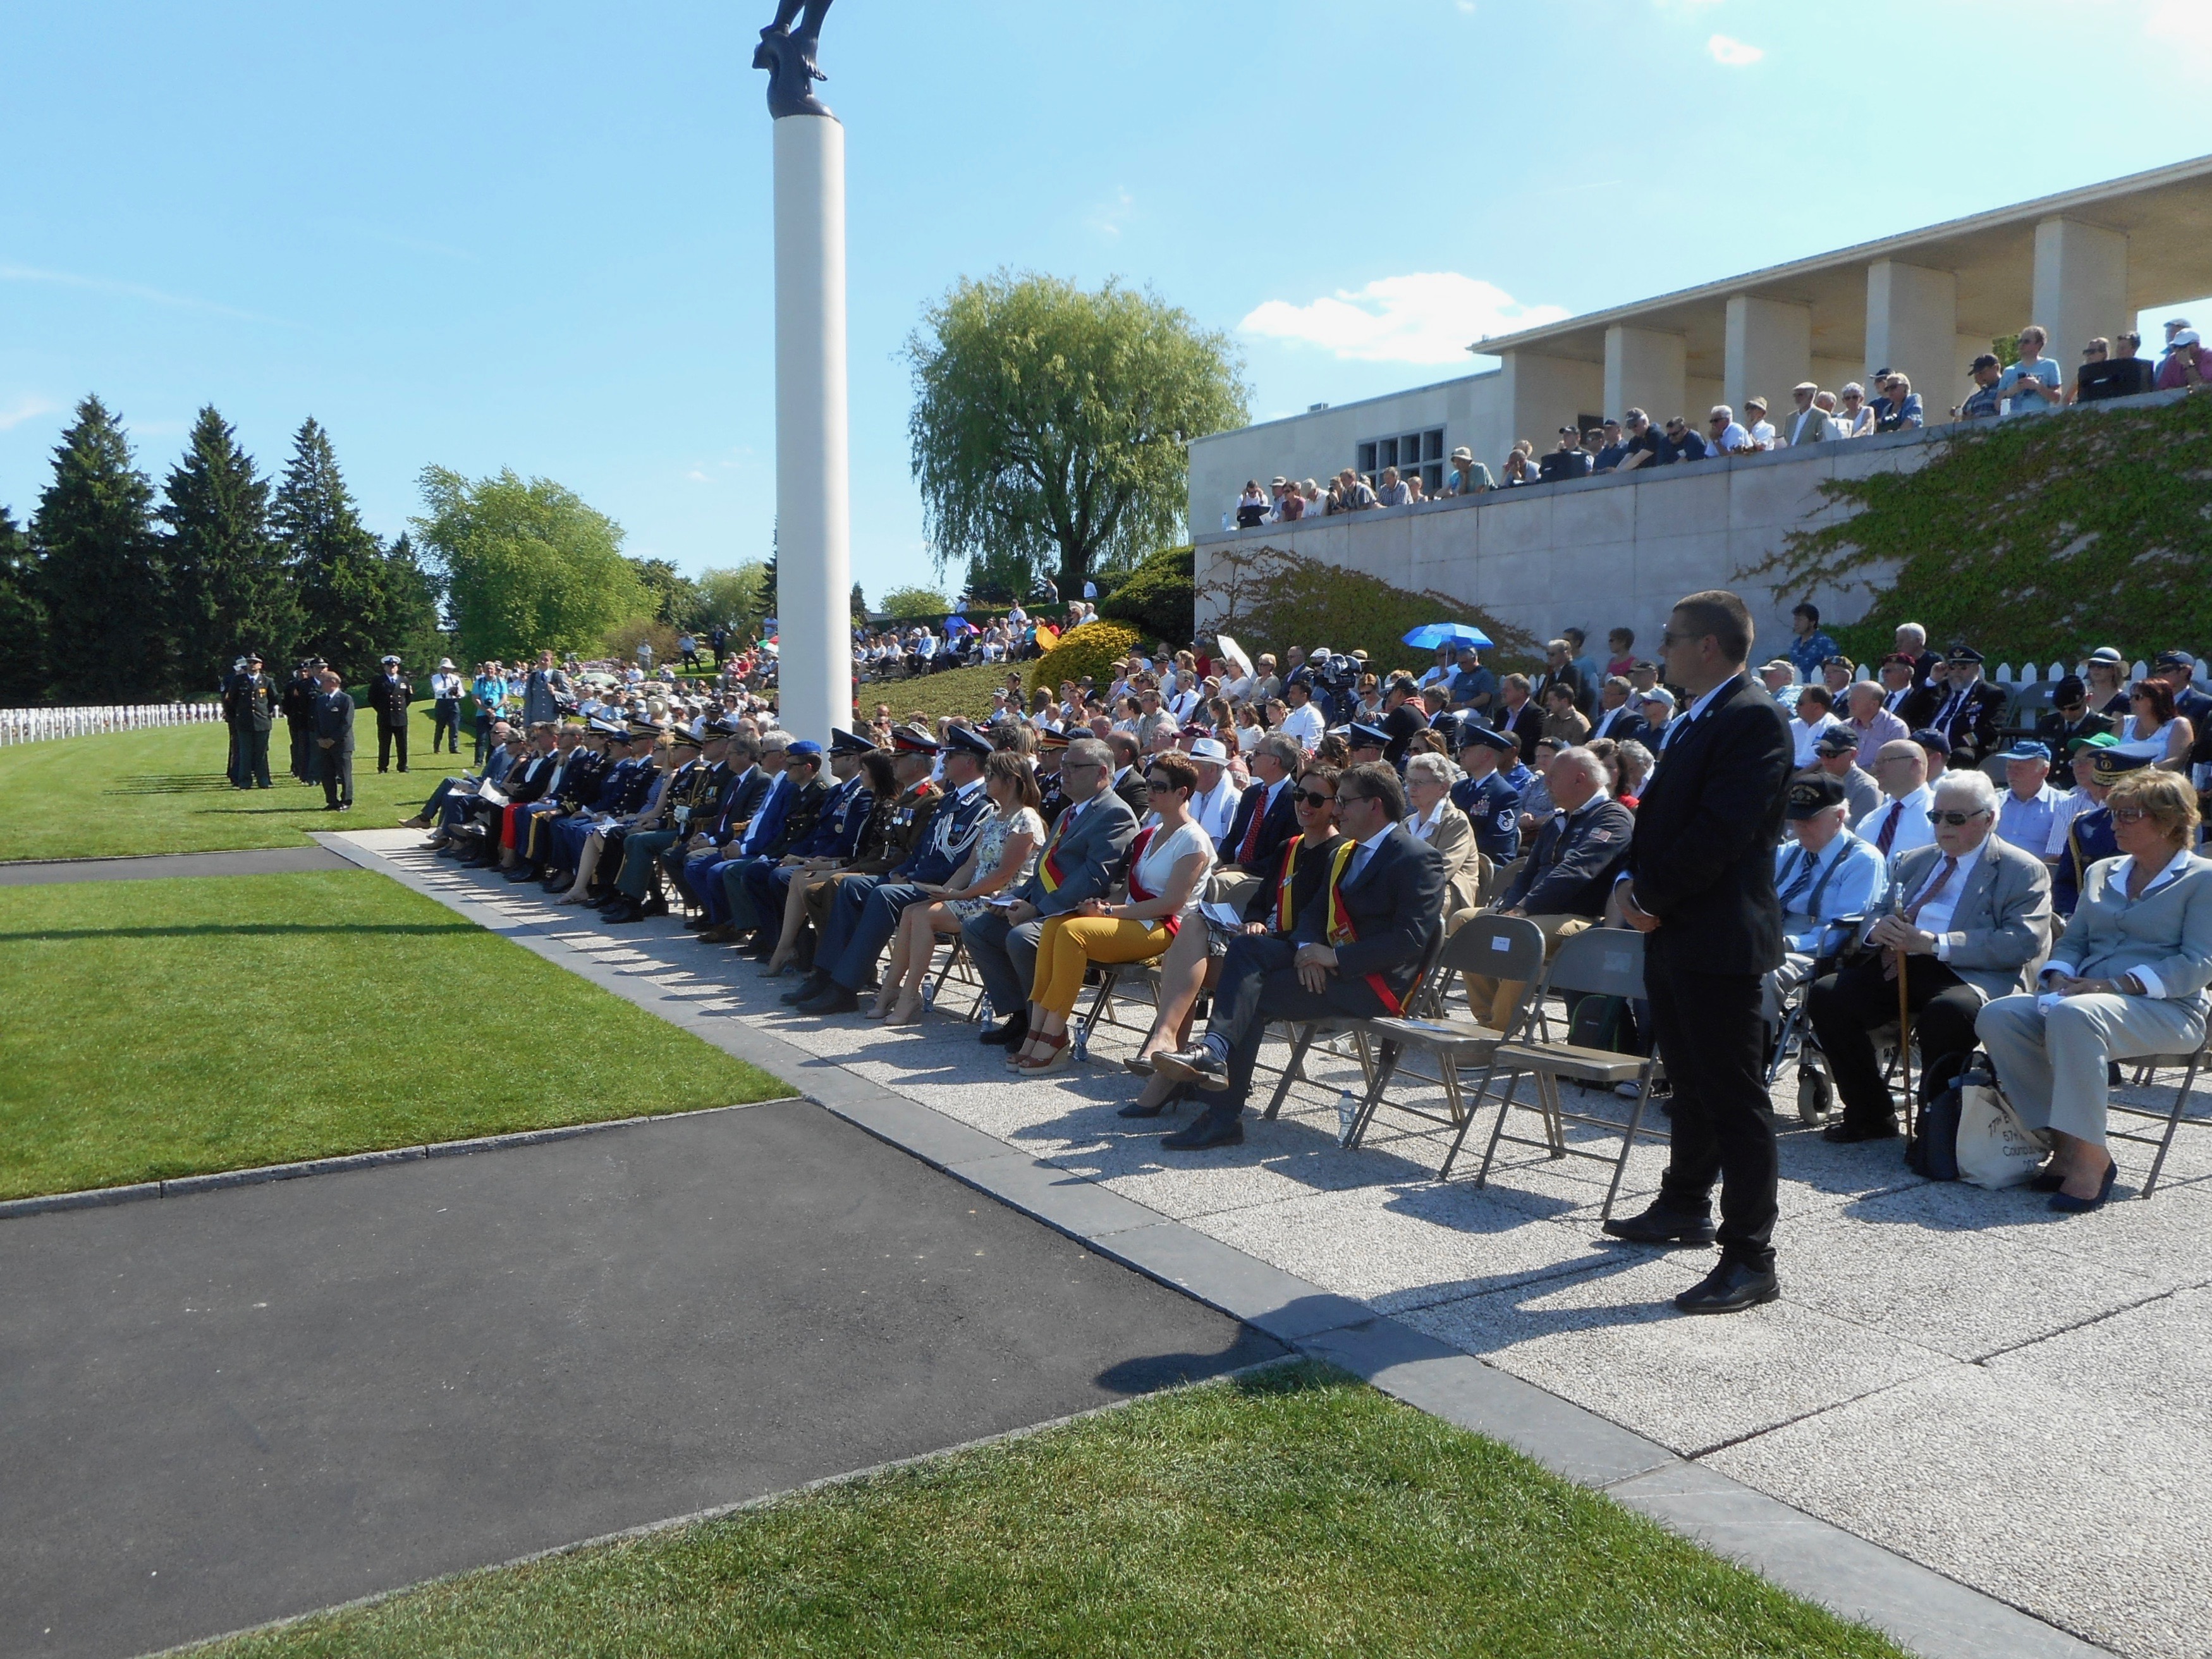 Attendees sit in chairs during the ceremony.